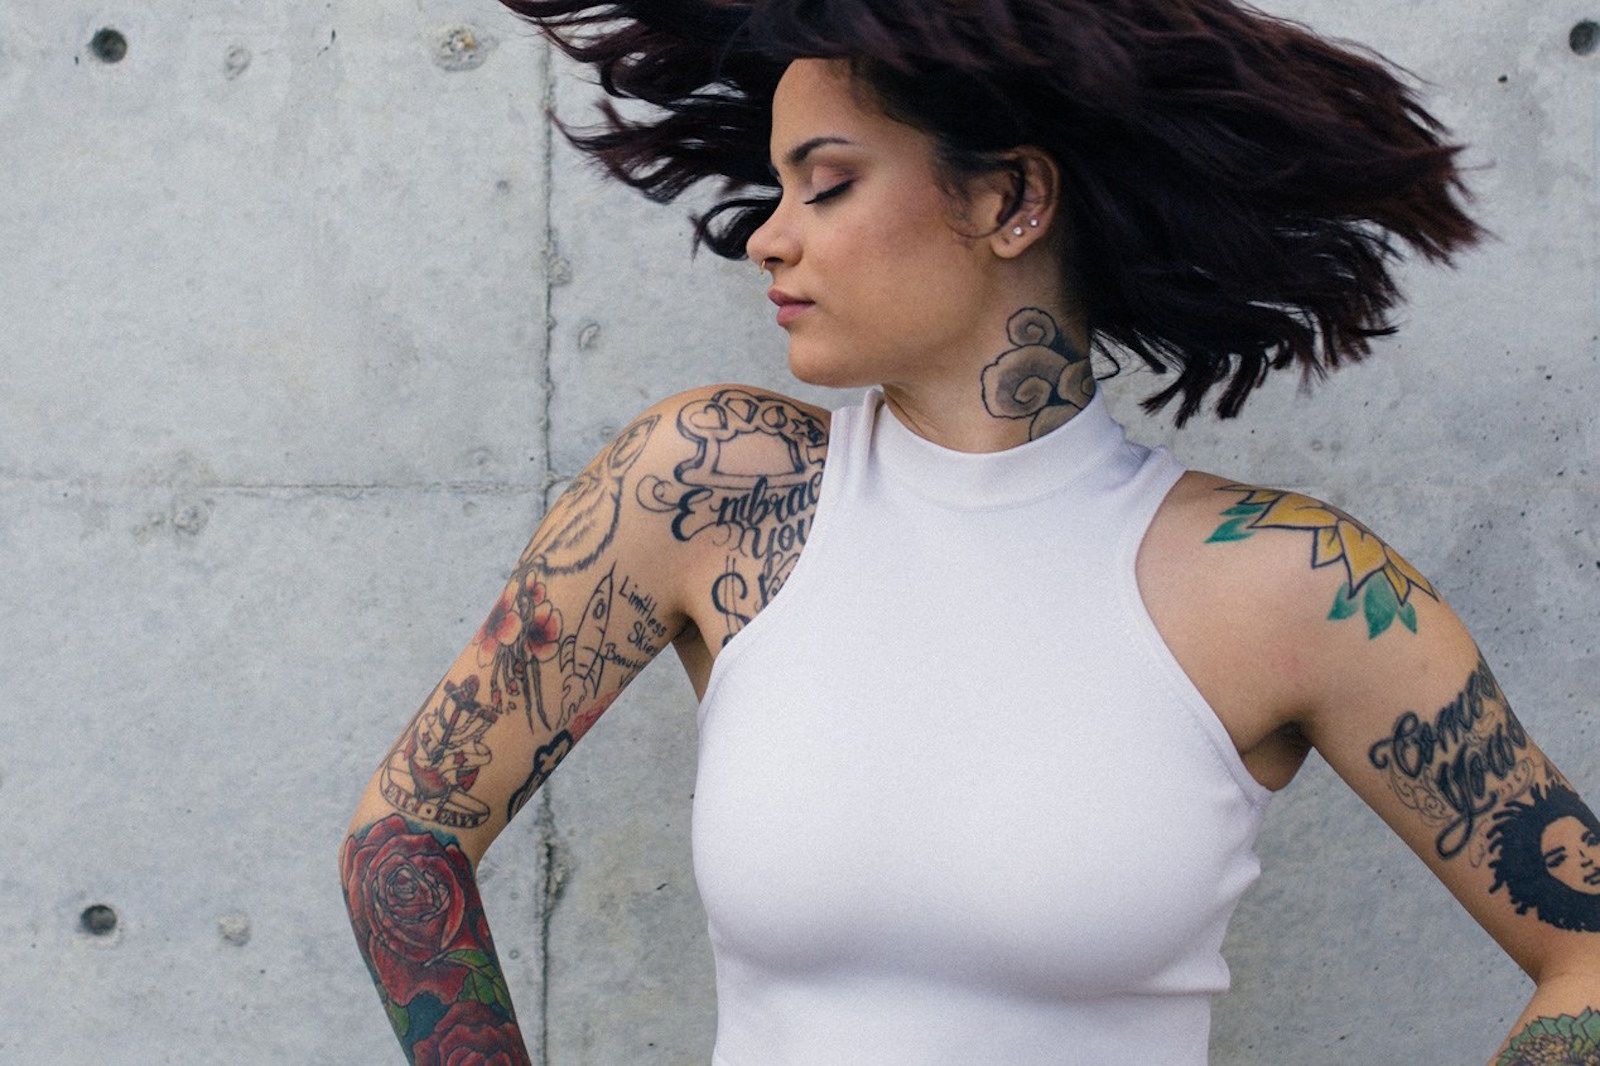 Kehlani's Ex Kyrie Irving Has 'Nothing But Love' For Her - Galore